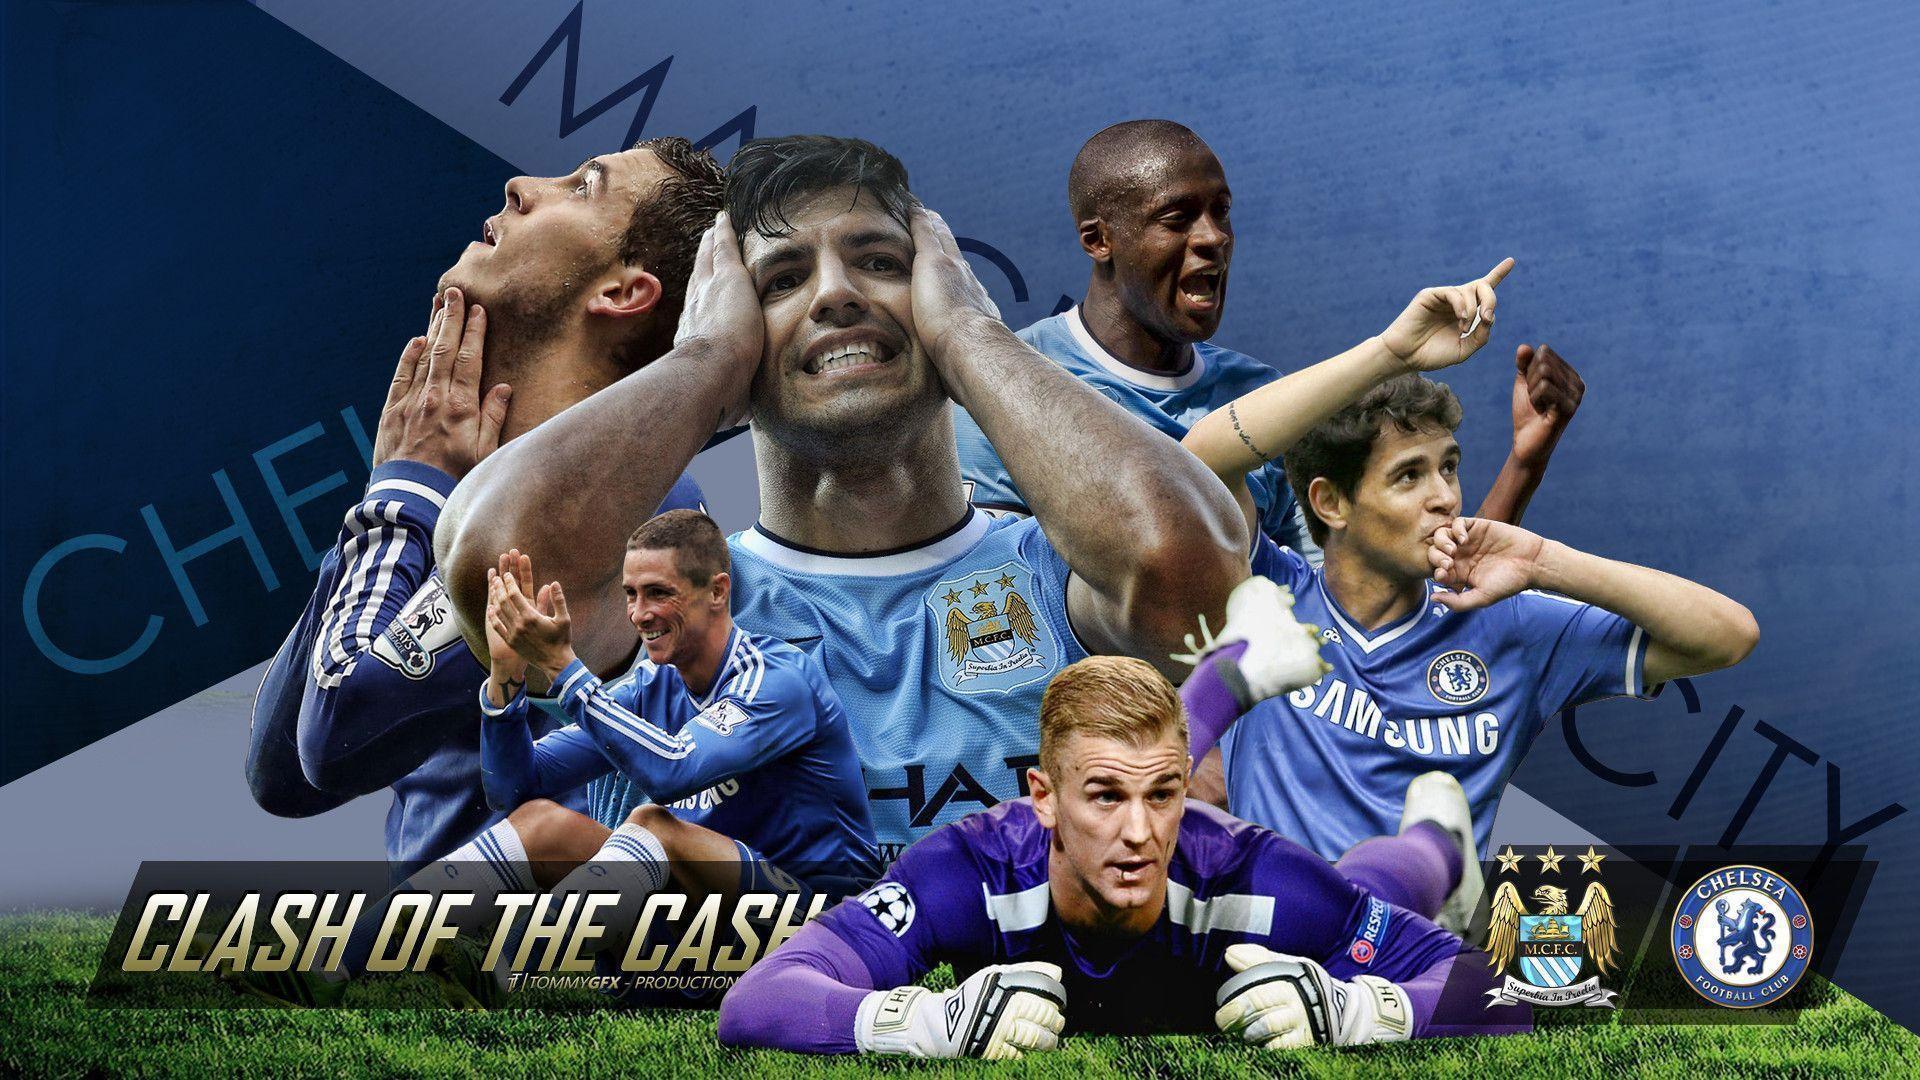 Manchester City vs Chelsea Wallpaper HD by TommyGFX. Football